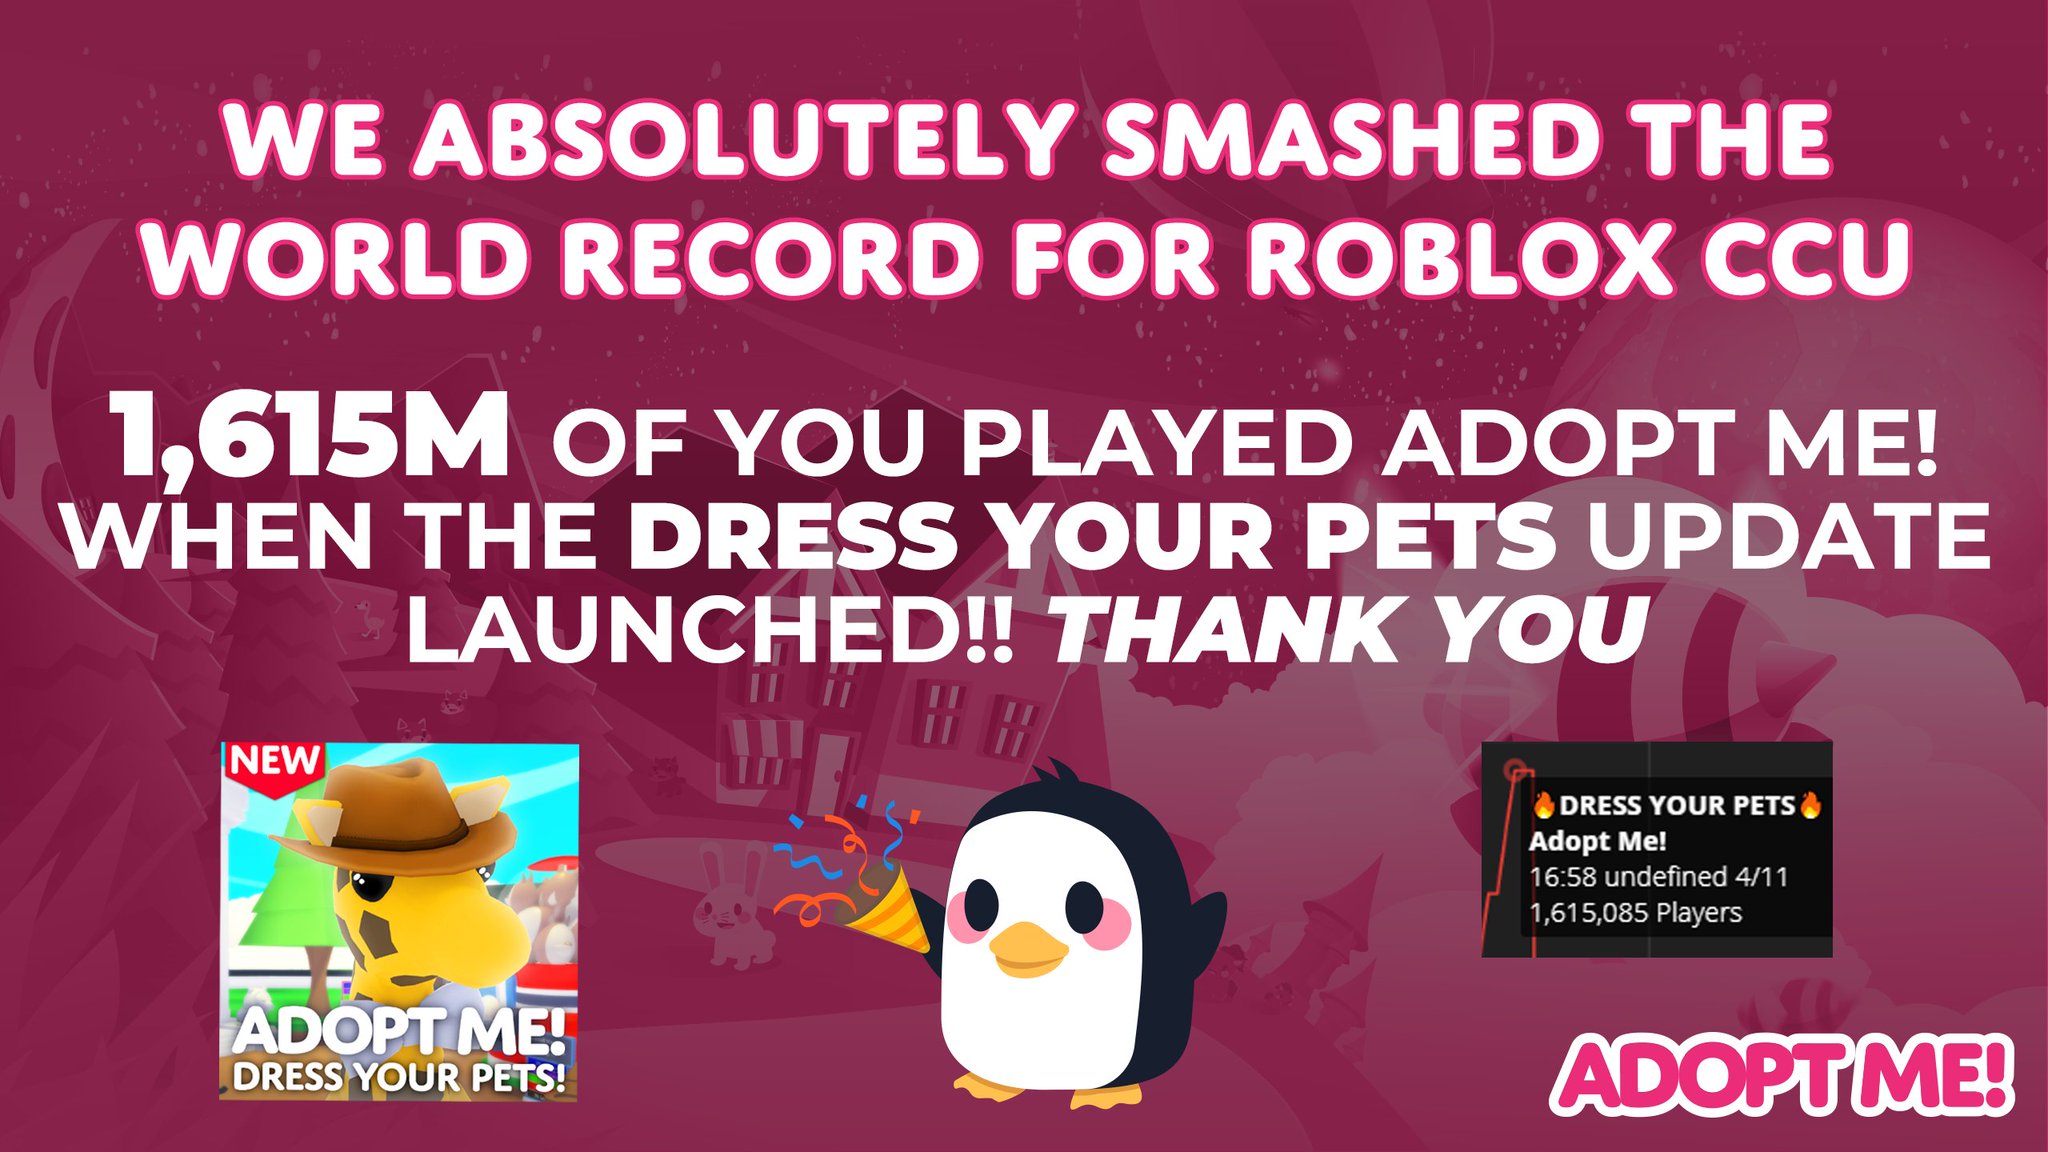 Adopt Me On Twitter The New World Record For Roblox Ccu Players Active Is 1 615 Million Players Thank You So Much For Tuning In To See The Live Event And Apologies - roblox users 1 profile